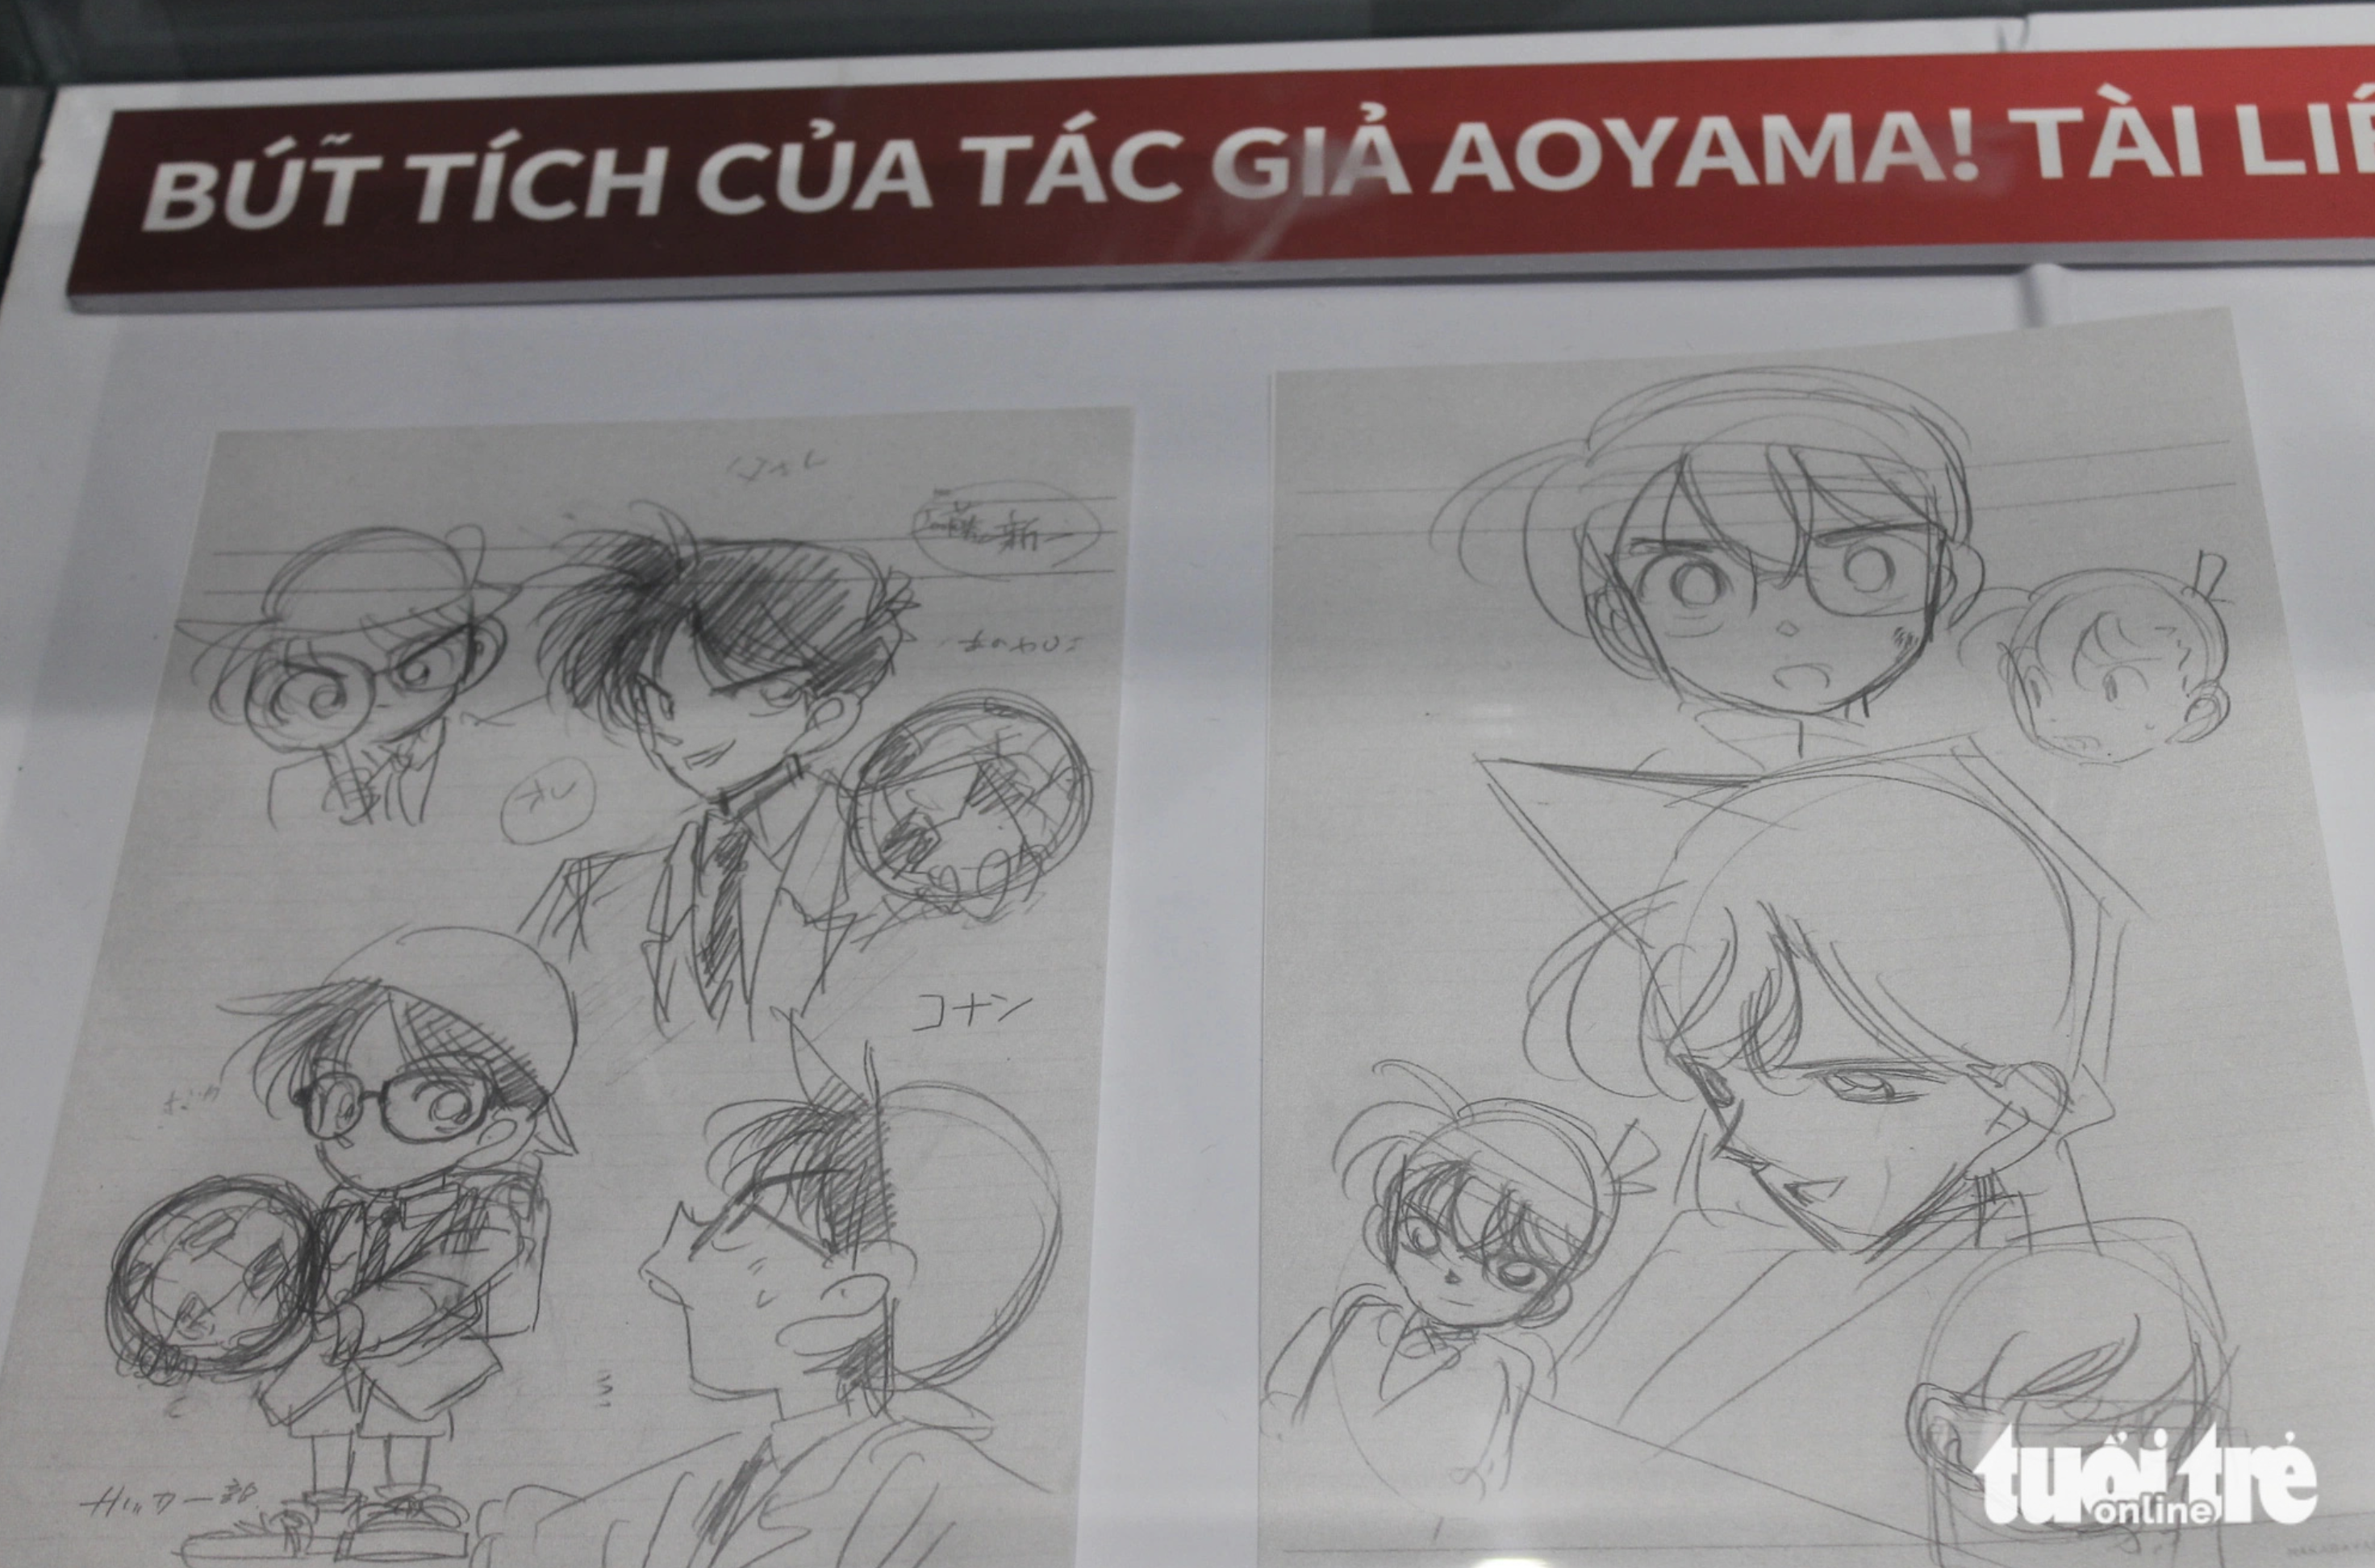 Sketches of characters in the manga series by artist Aoyama Gosho. Photo: To Cuong / Tuoi Tre